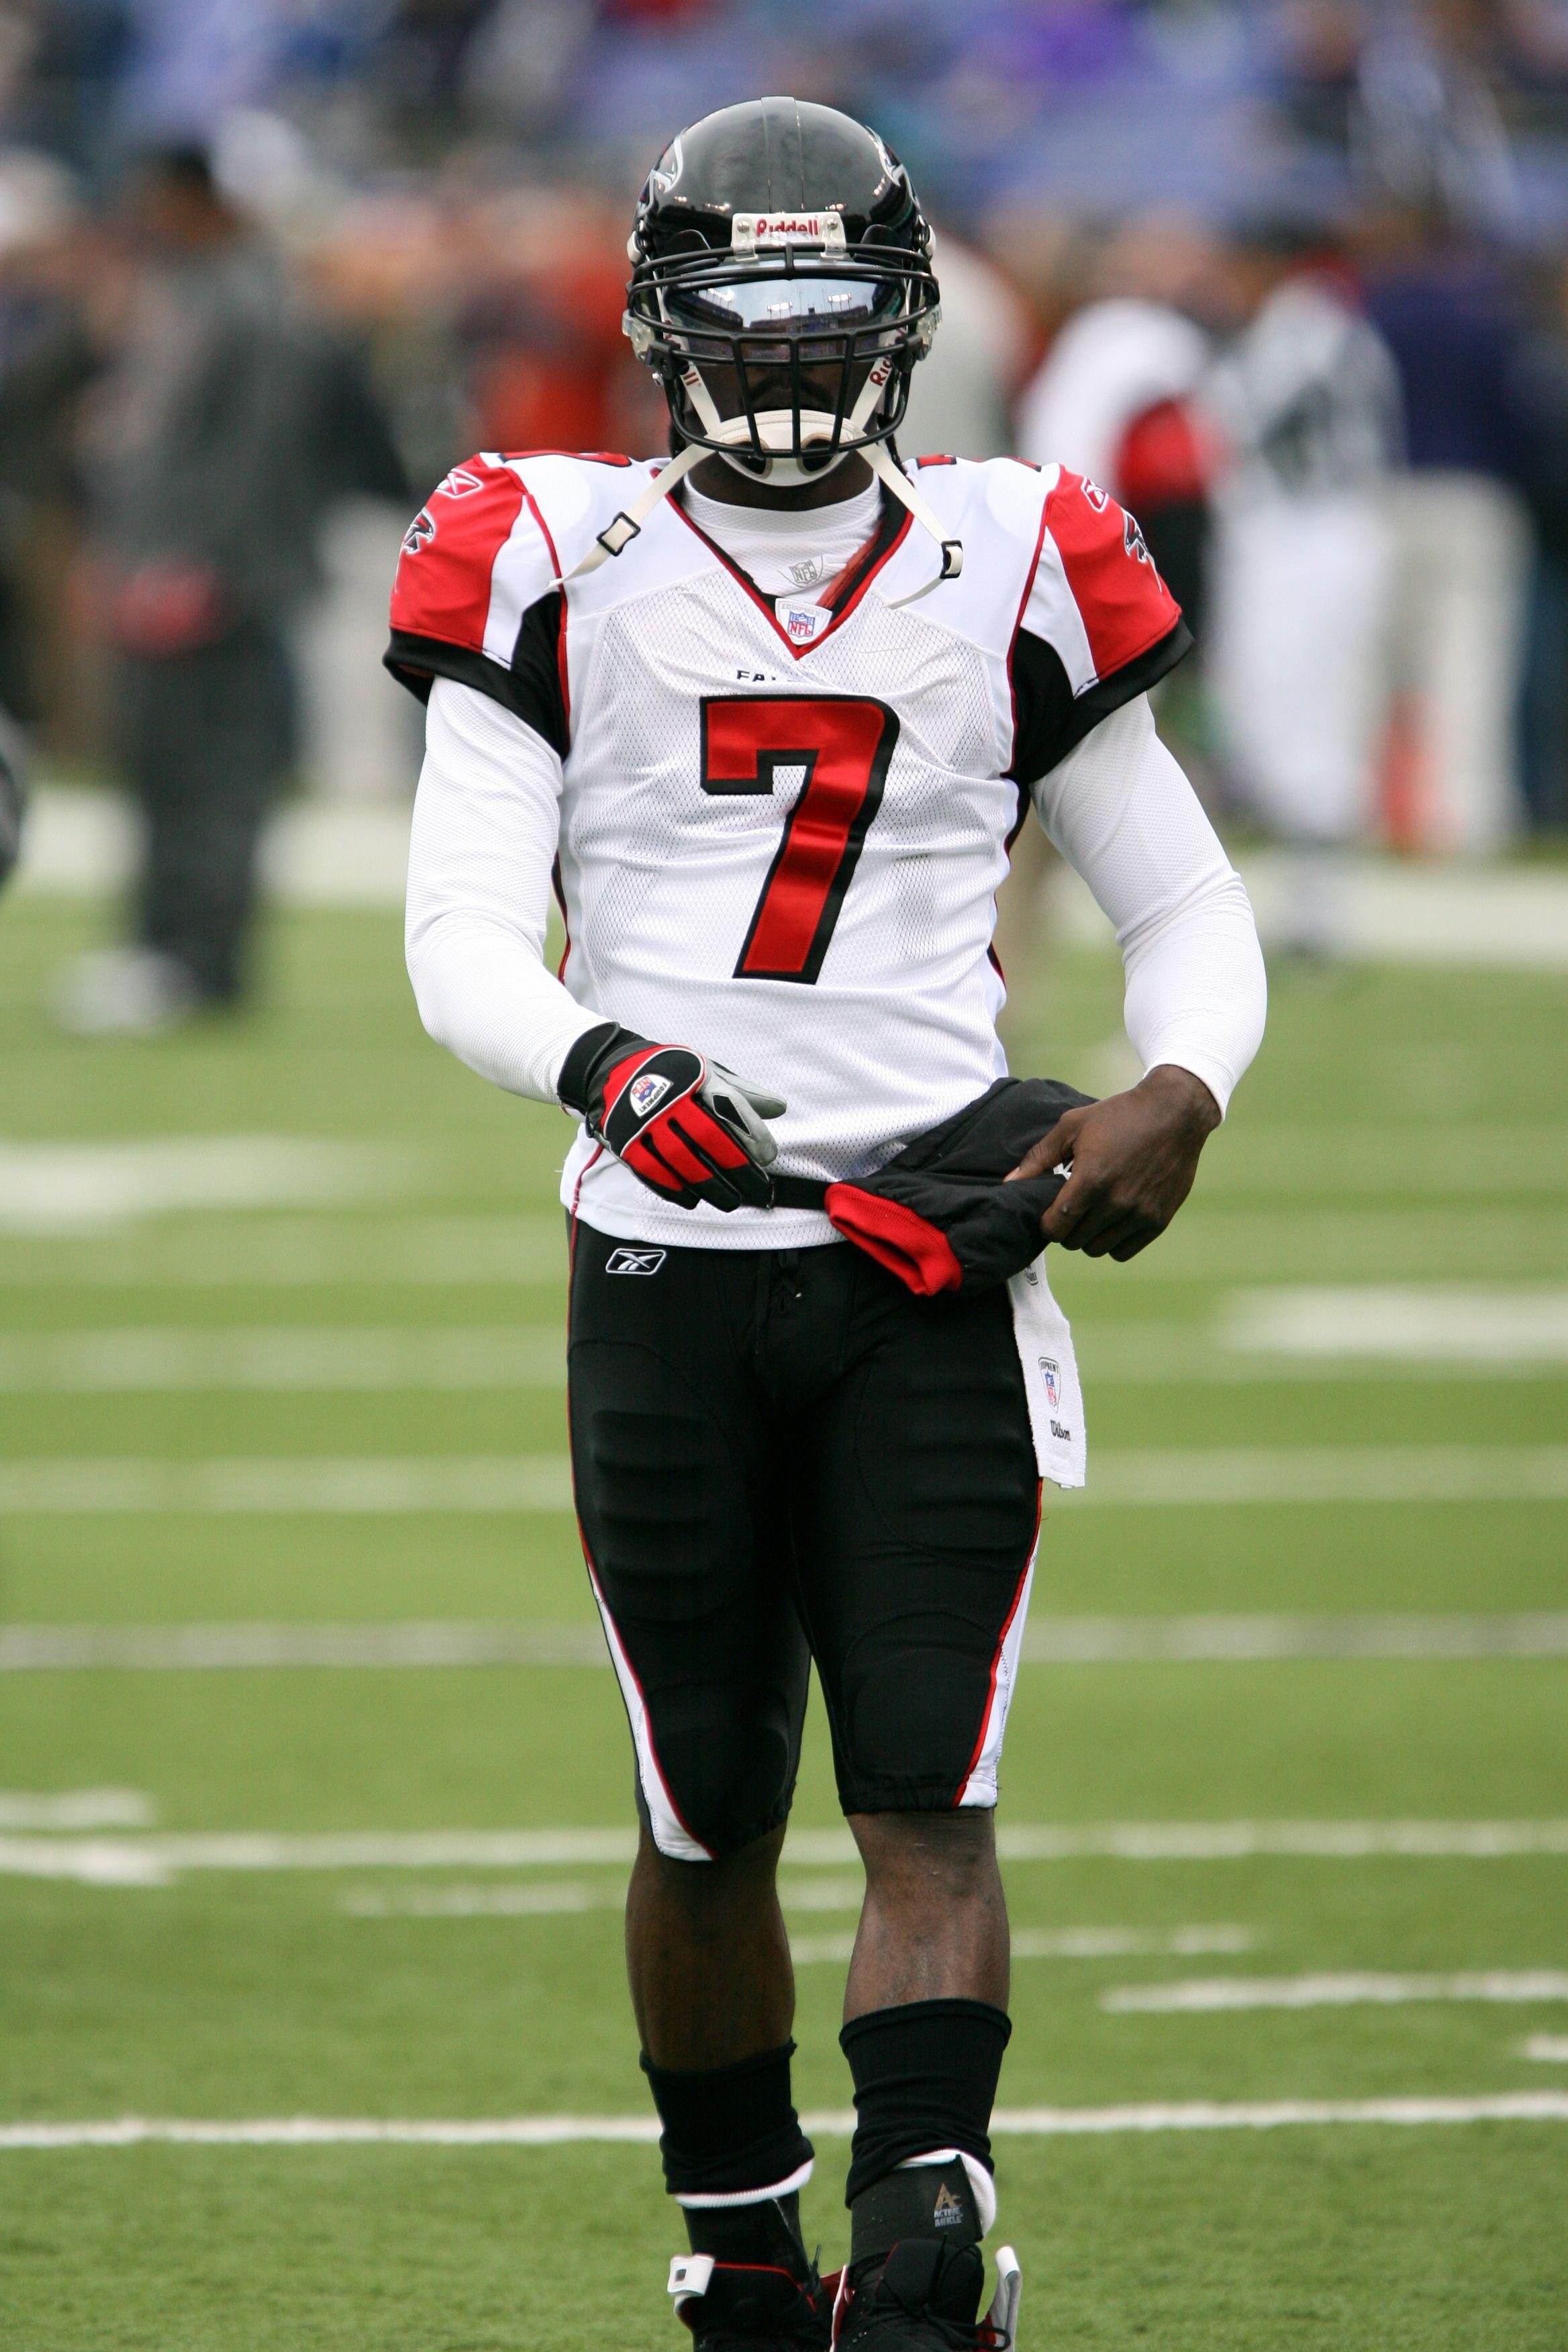 Michael Vick Wallpapers - Top Free Michael Vick Backgrounds